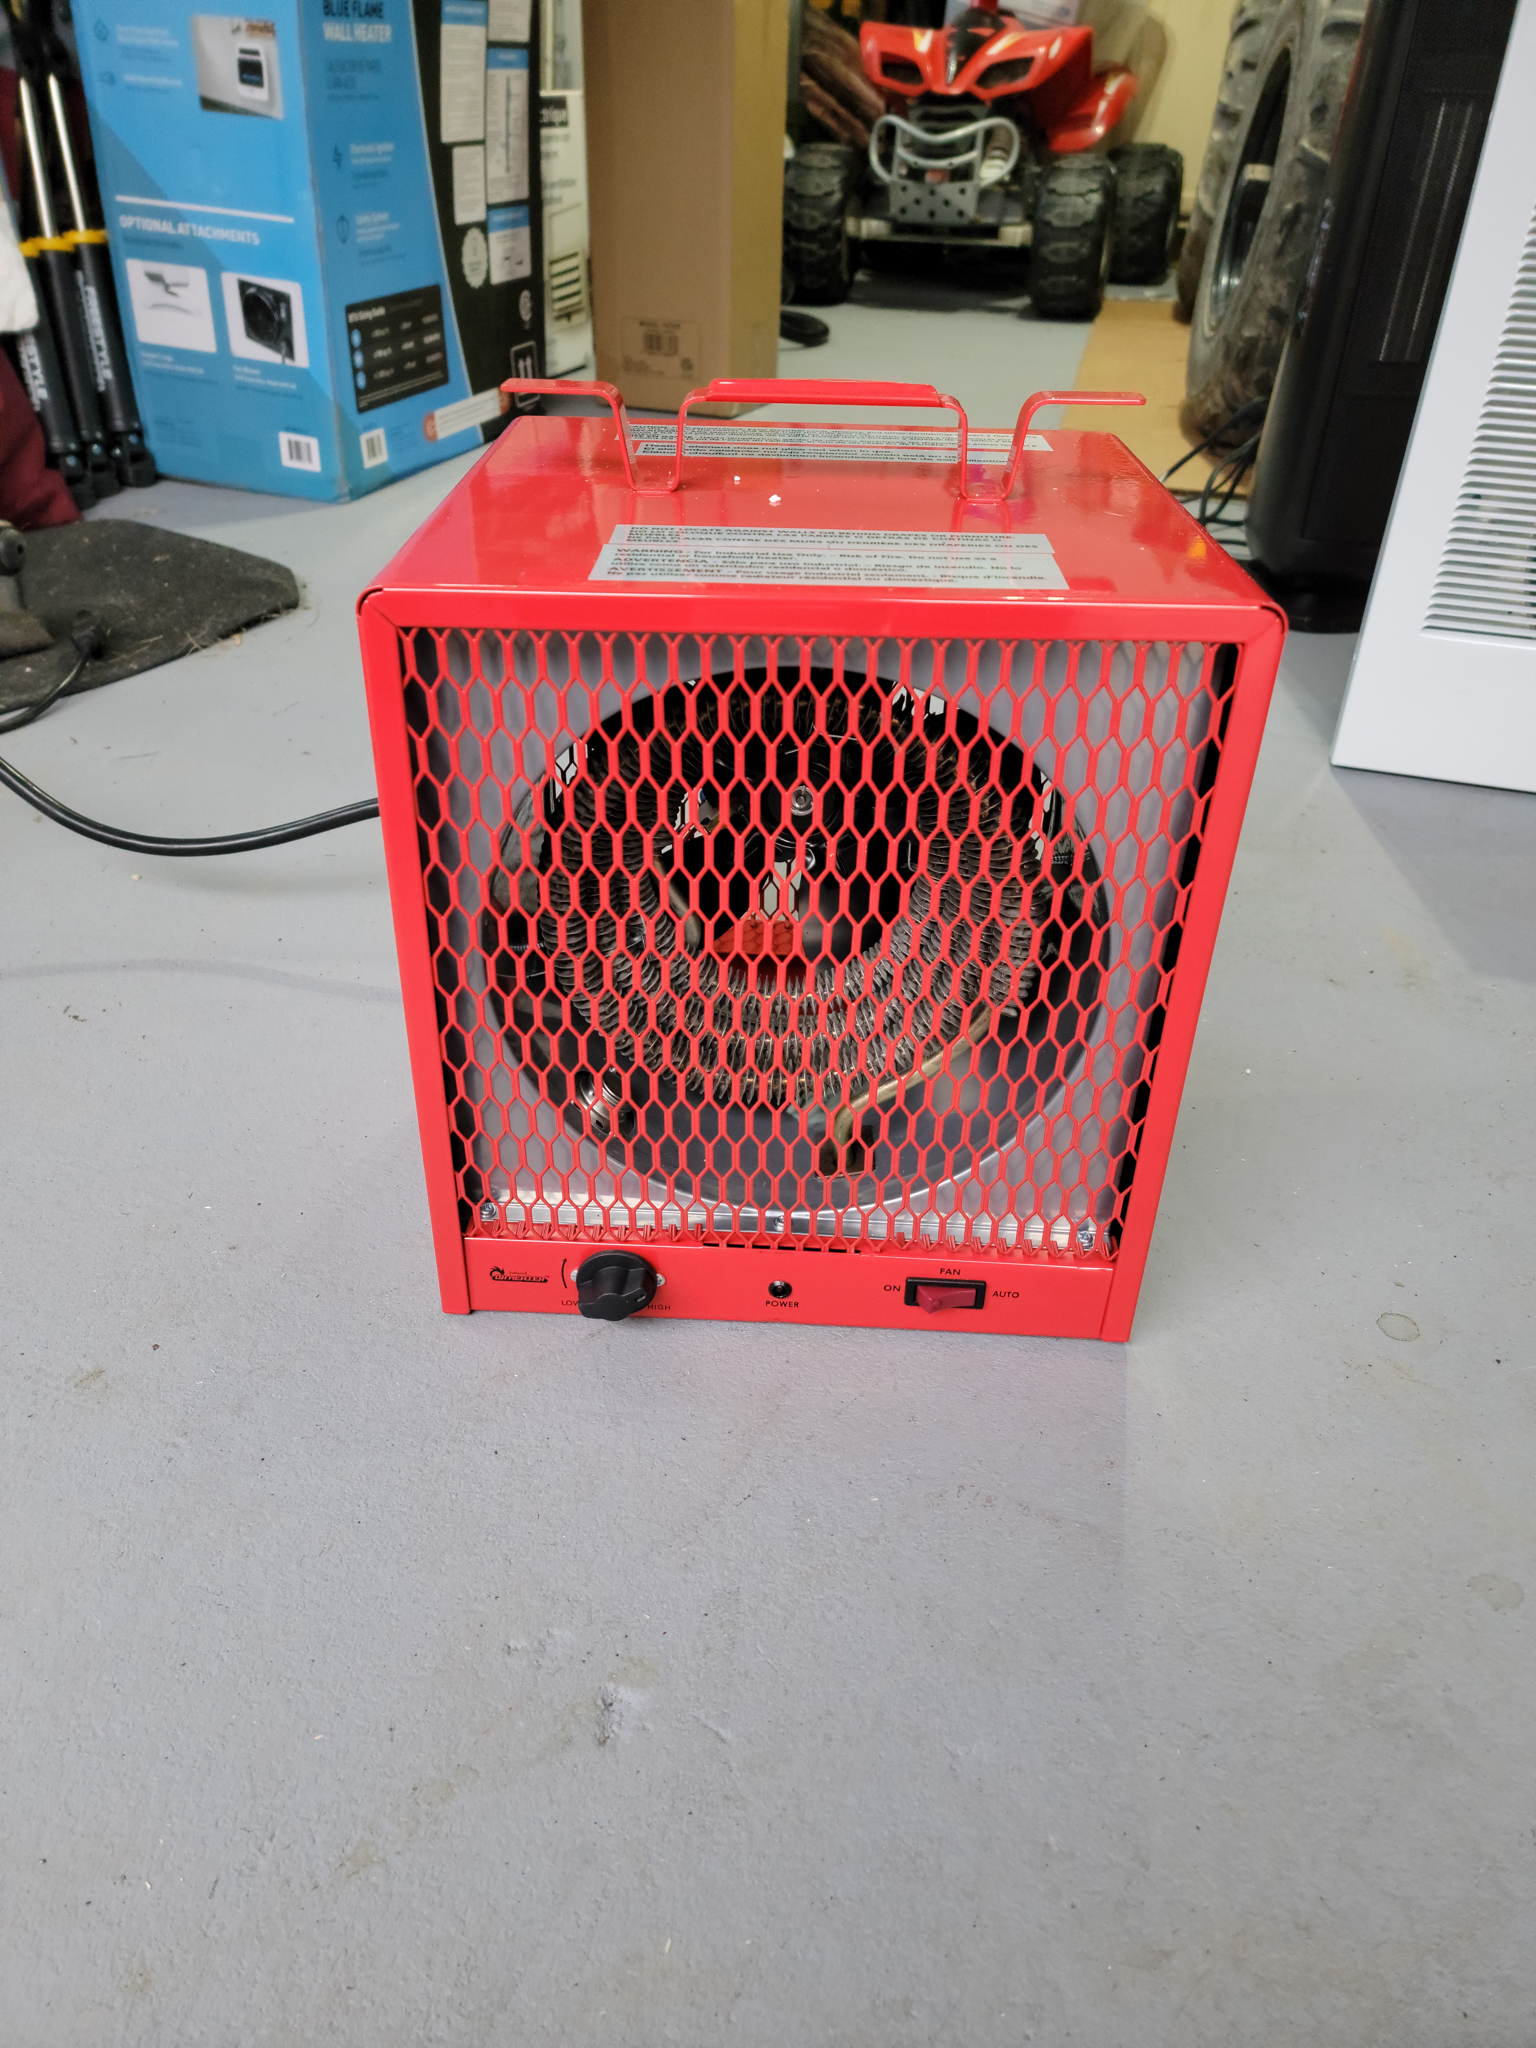 The Dr. Infrared Heater DR-988 Portable Industrial Heater on a garage floor before testing.